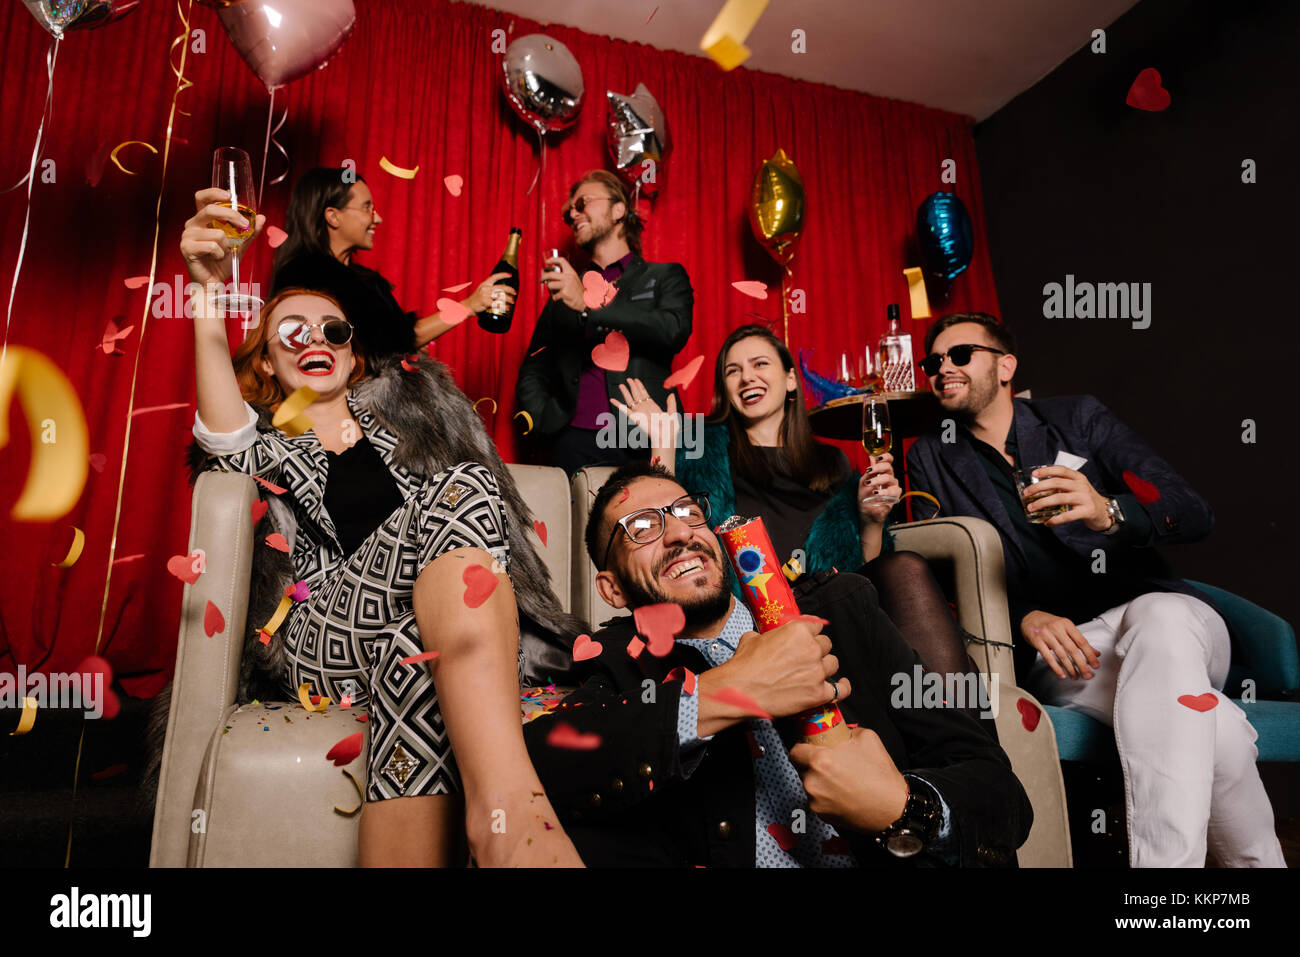 New year moment at a party Stock Photo